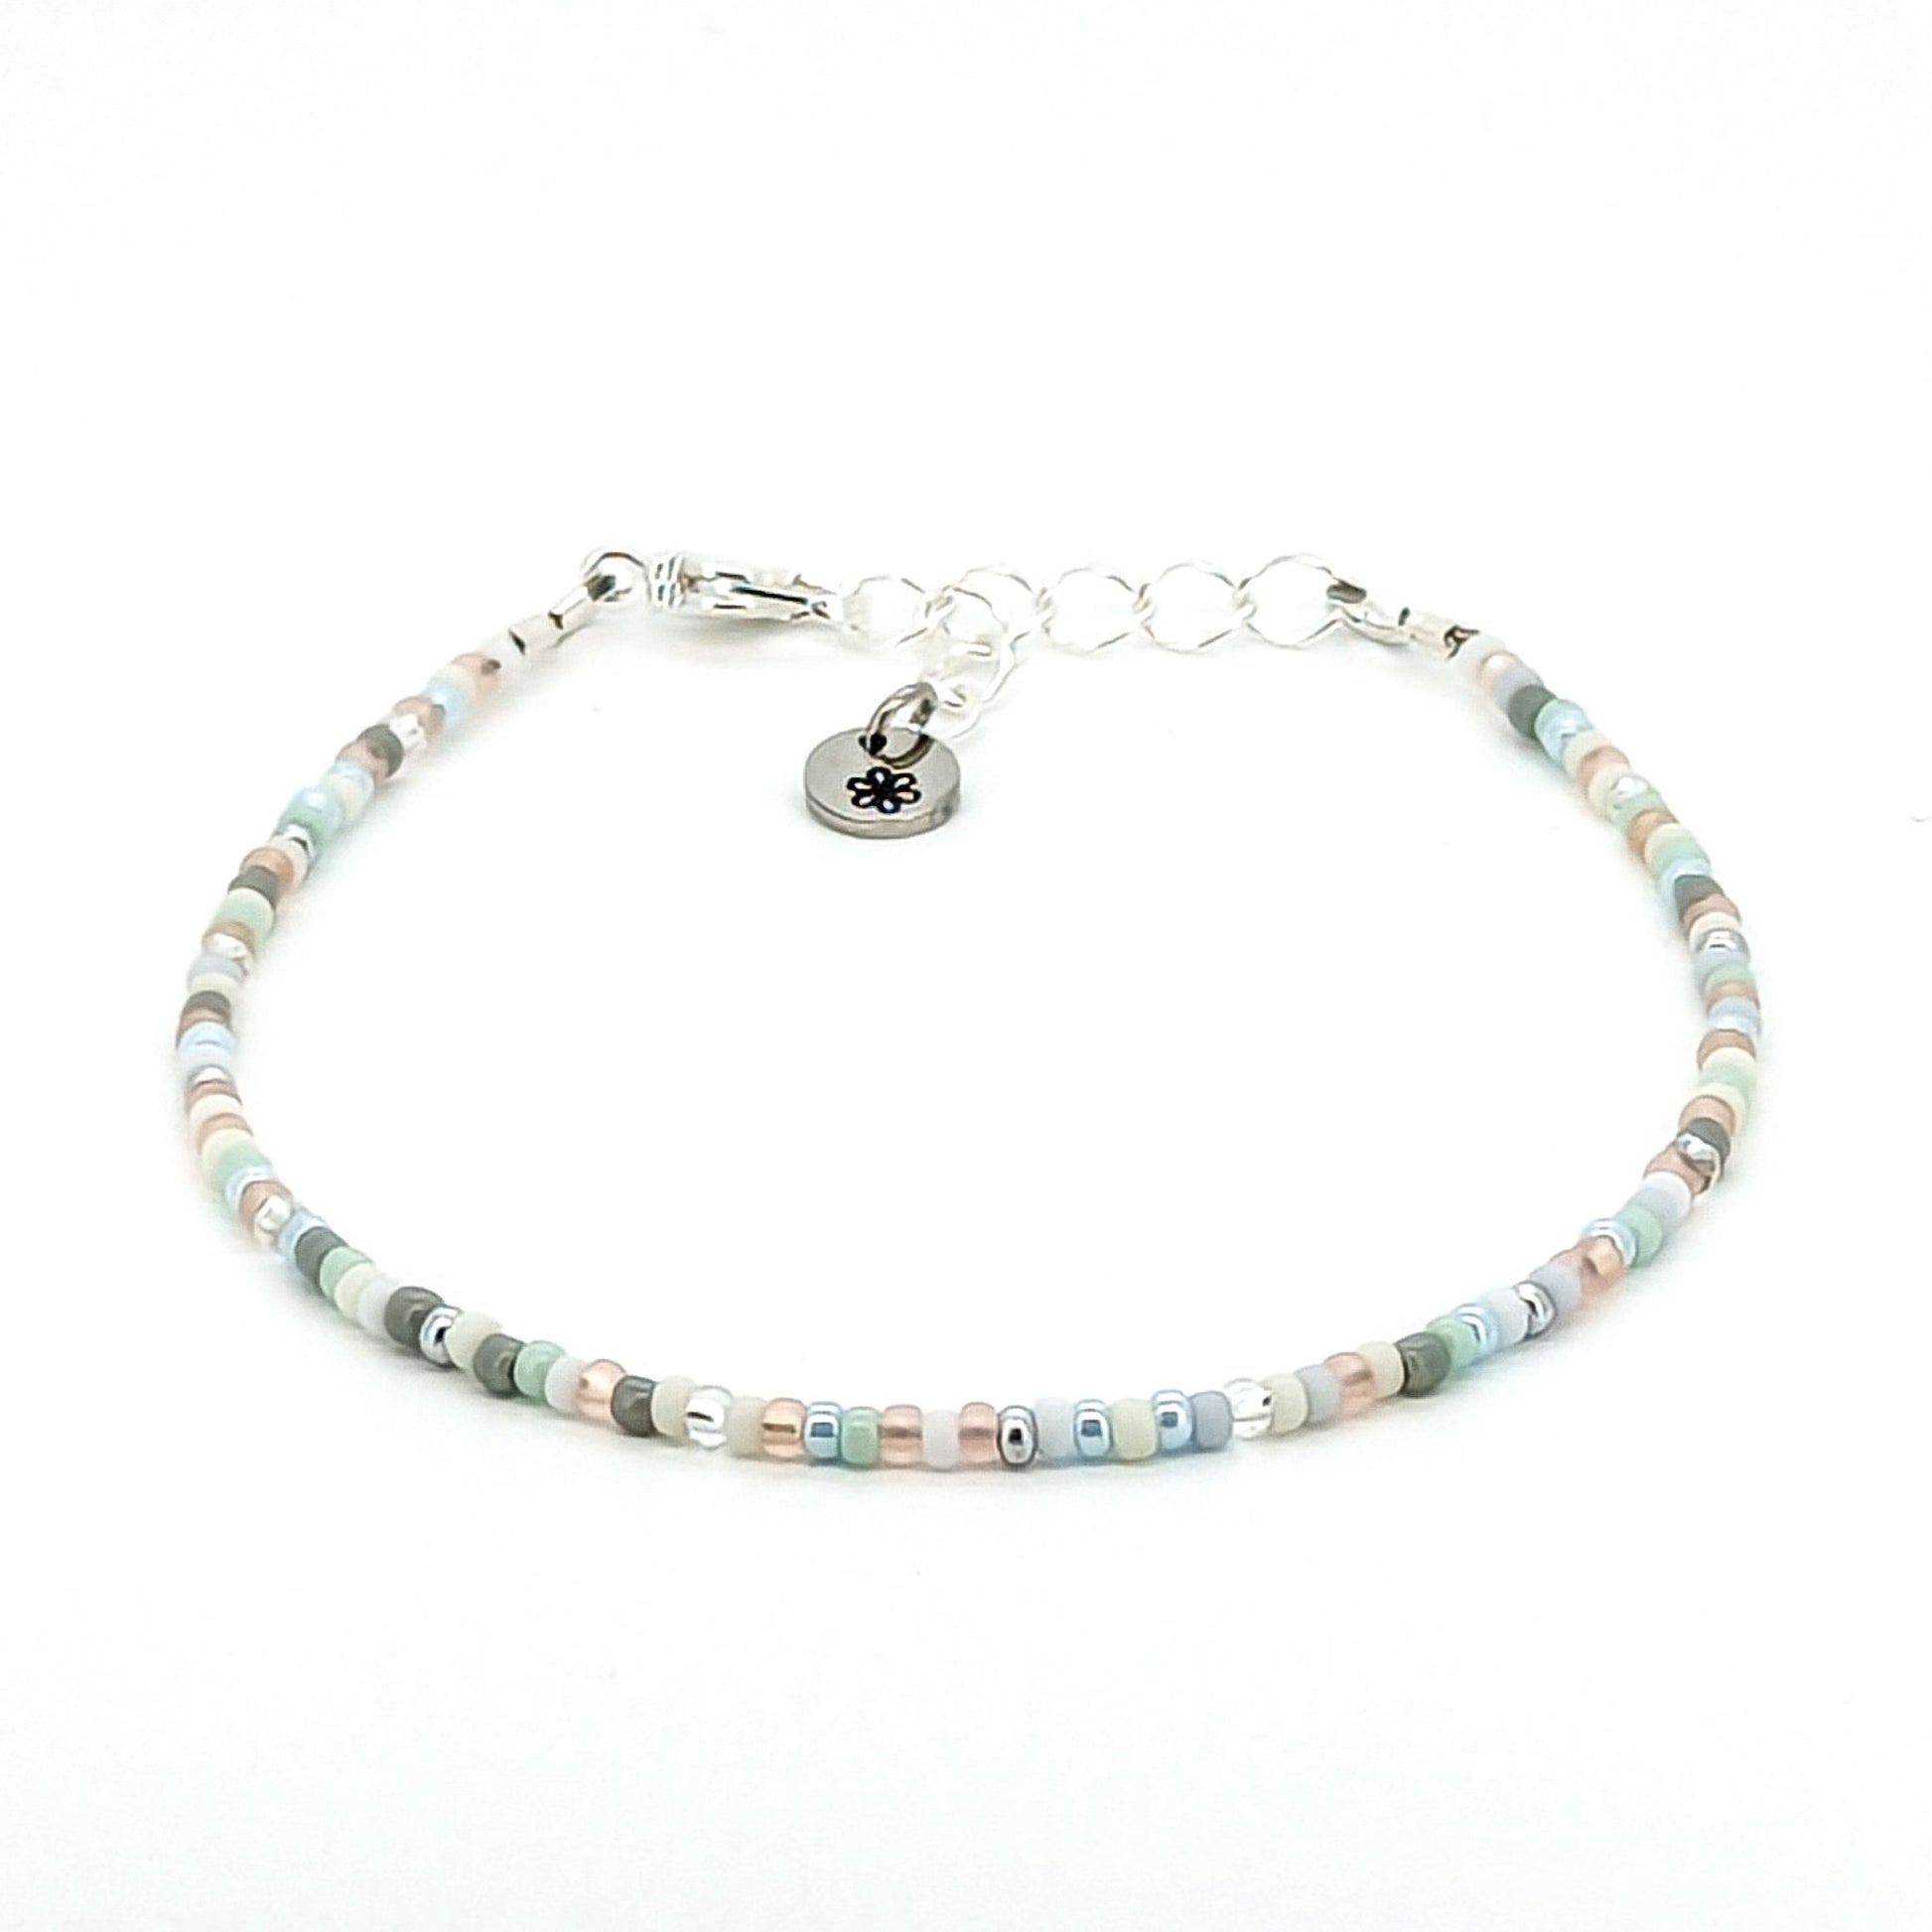 Dainty bracelet - Pale blue, white and silver seed bead bracelet - creations by cherie